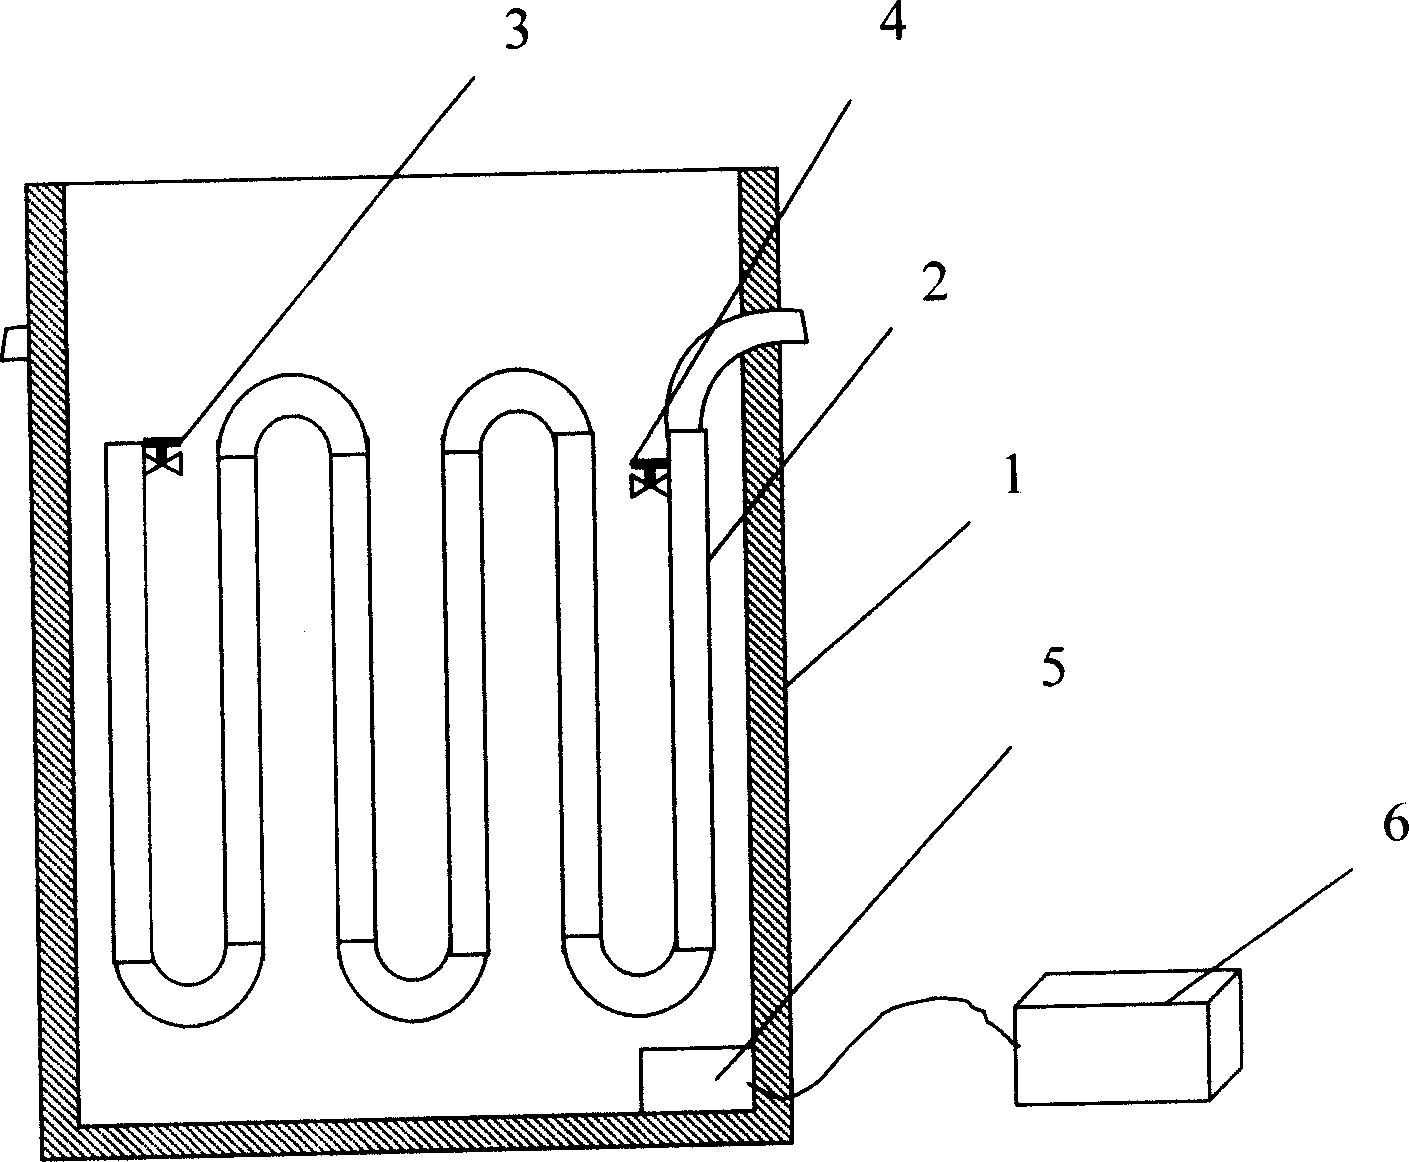 Filtering equipment and cleaning method using ultrasonic cleaning